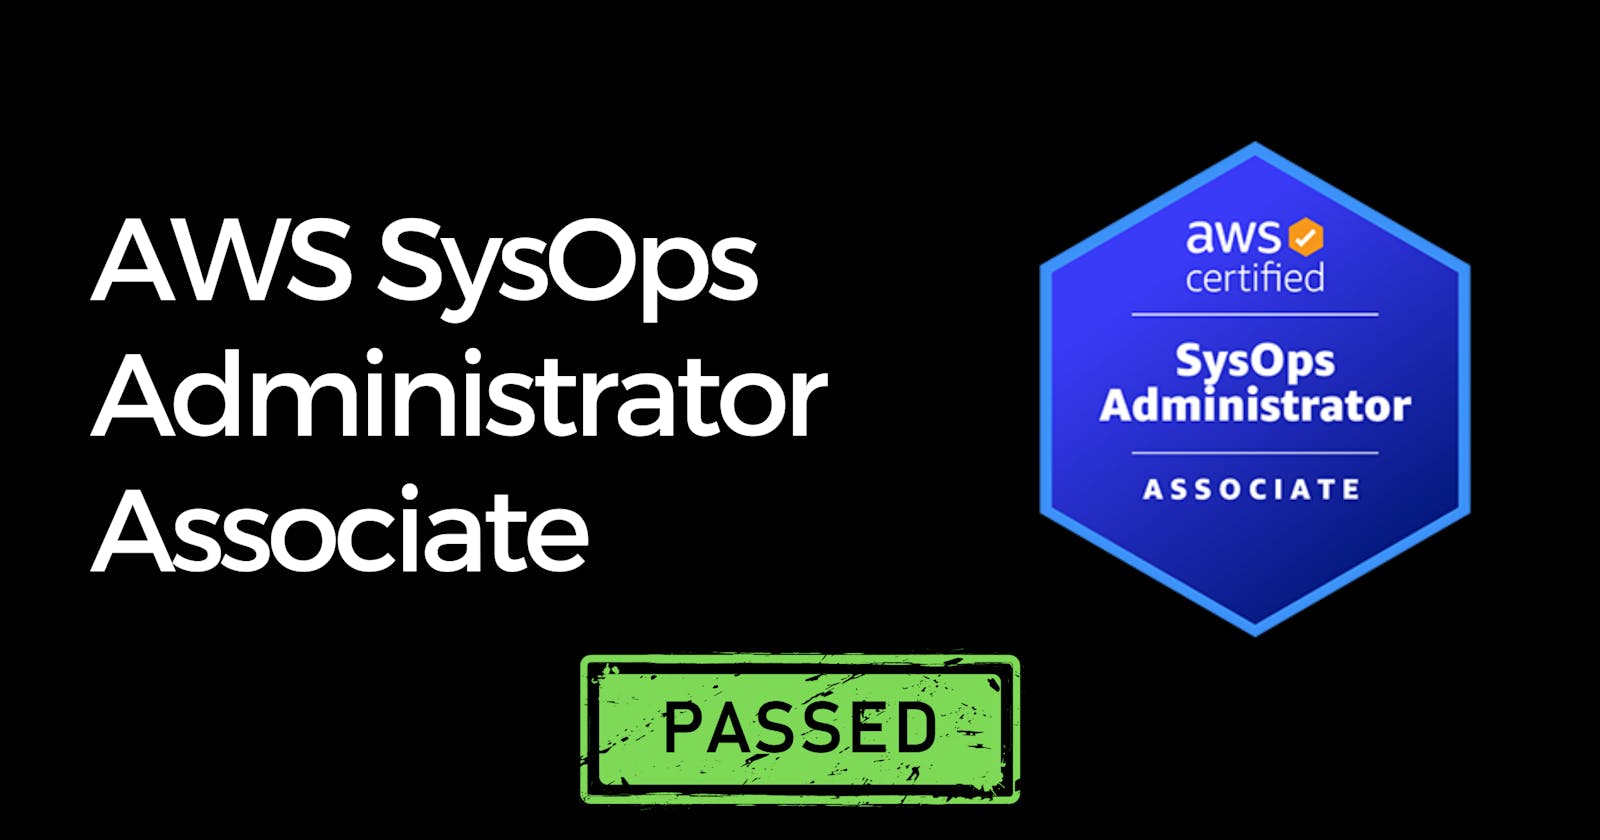 How I passed AWS Certified SysOps Administrator in 2 weeks